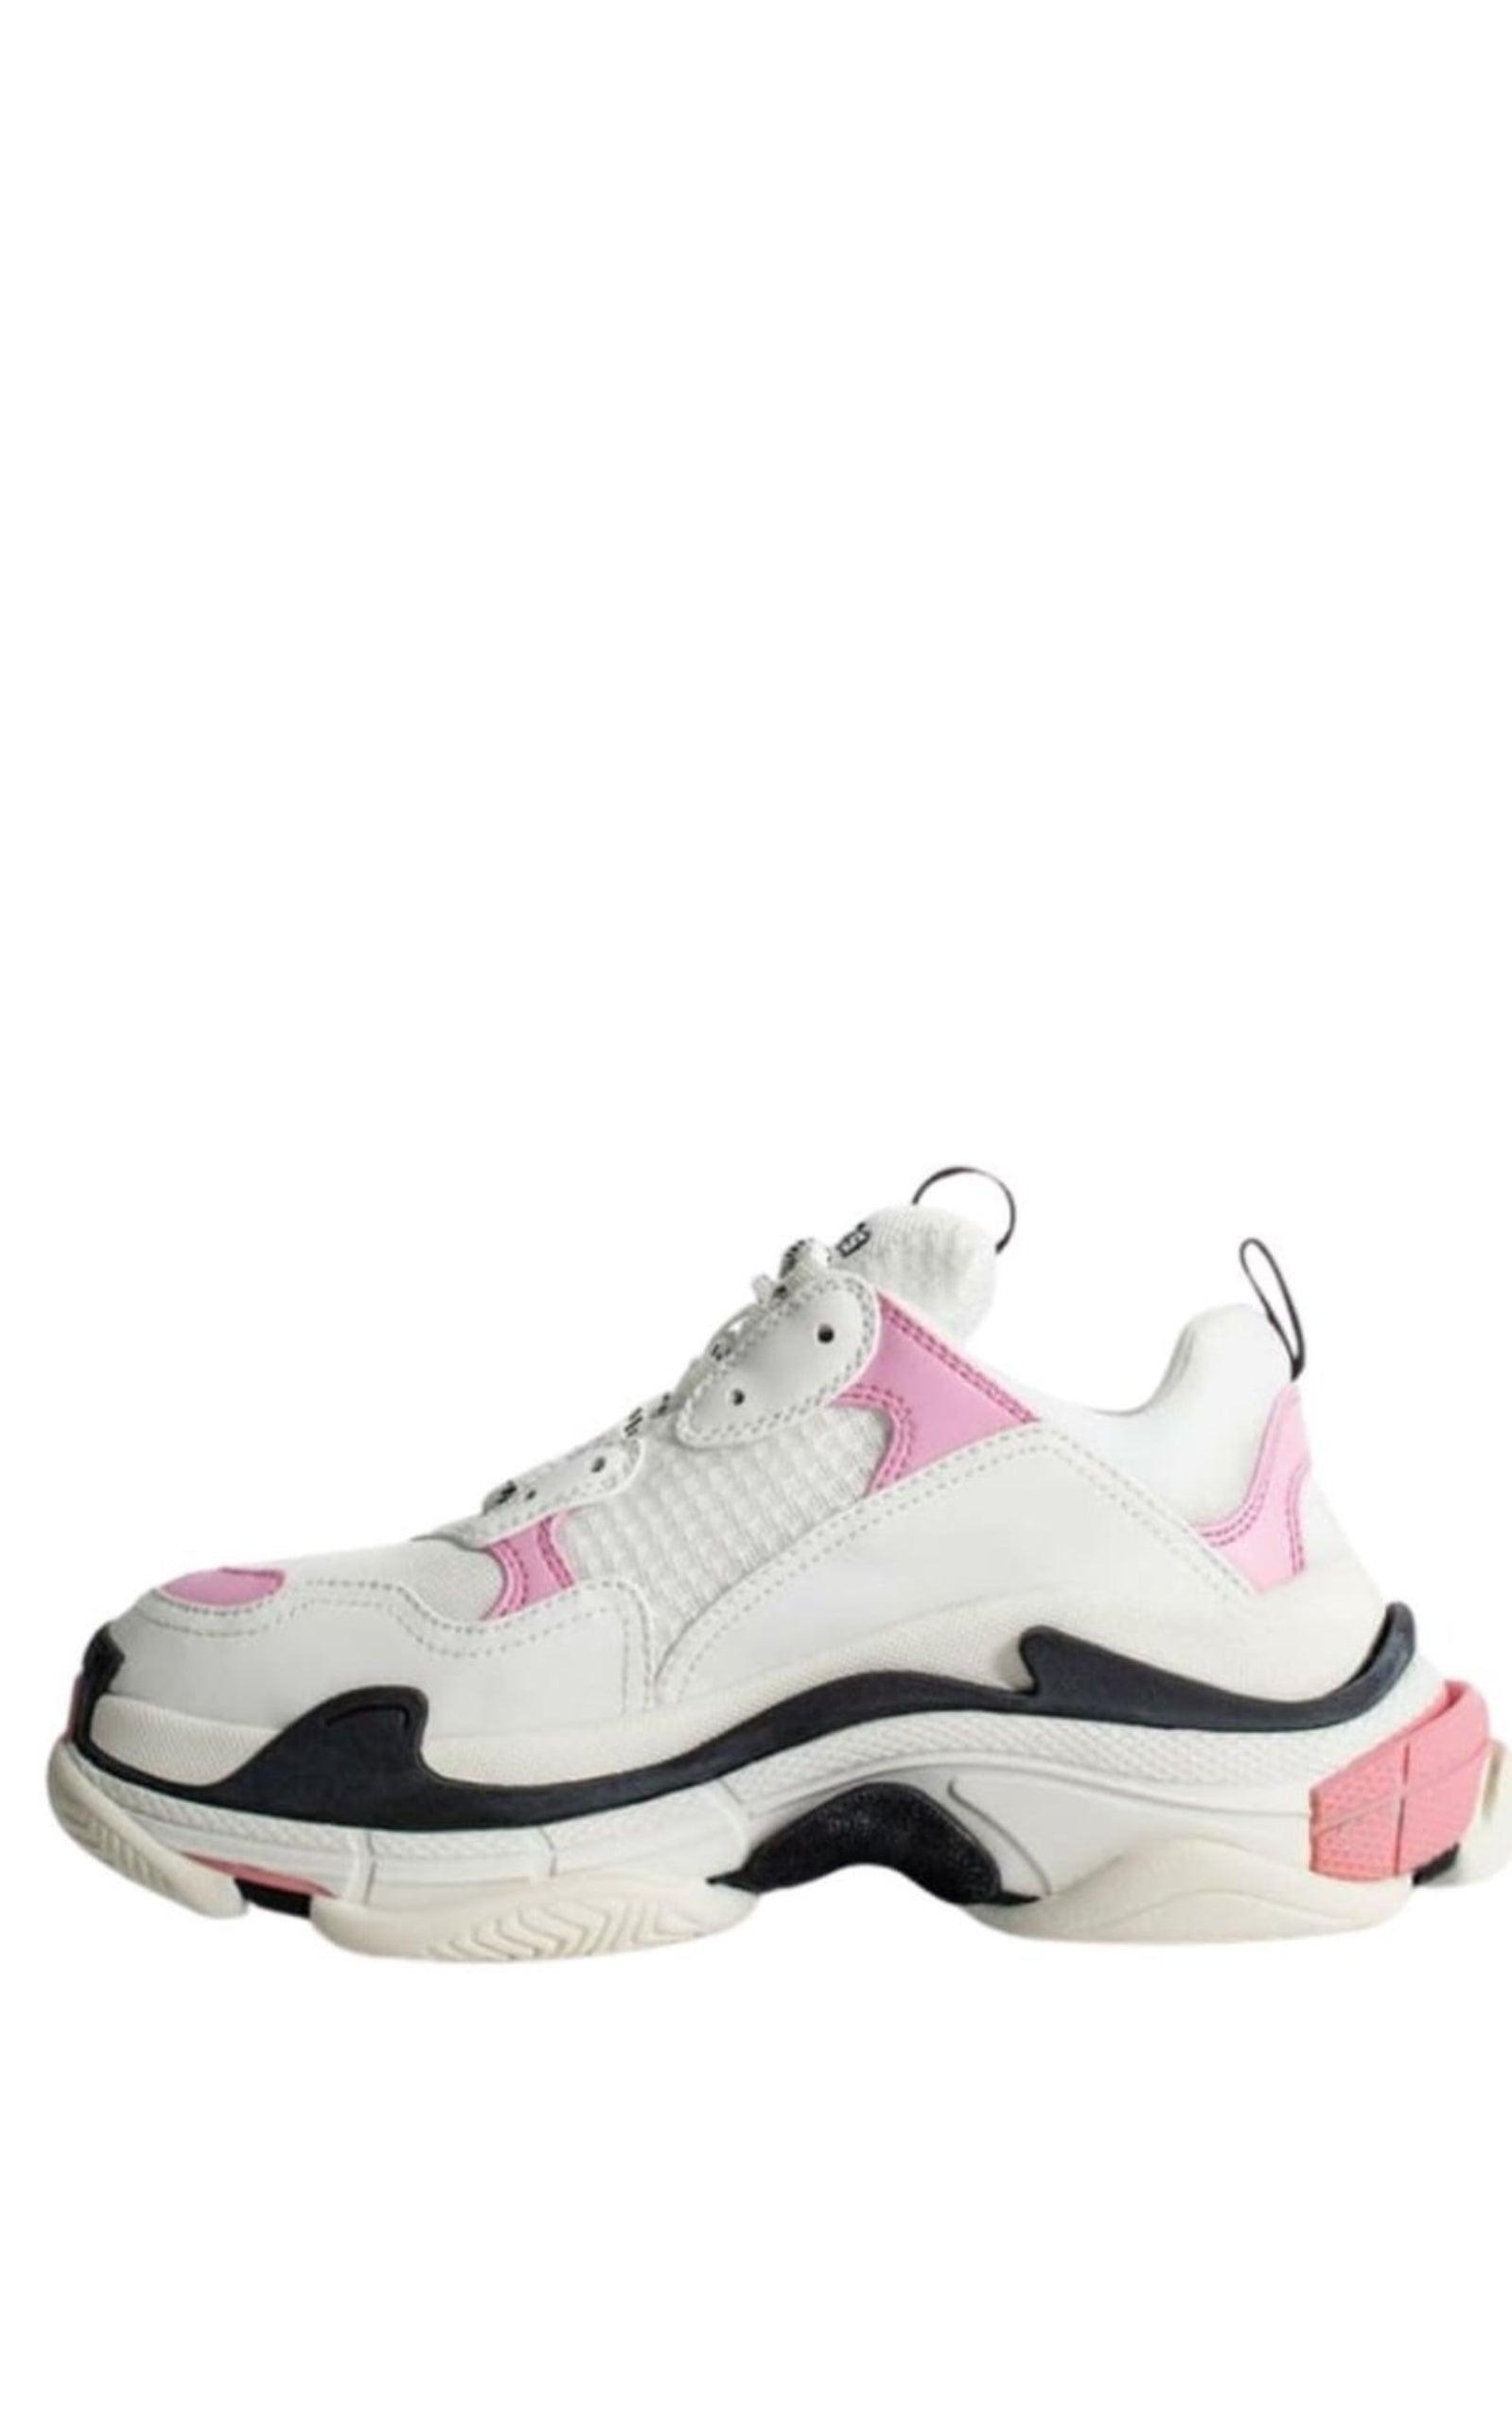  BalenciagaTriple S leather and Mesh Sneakers - Runway Catalog